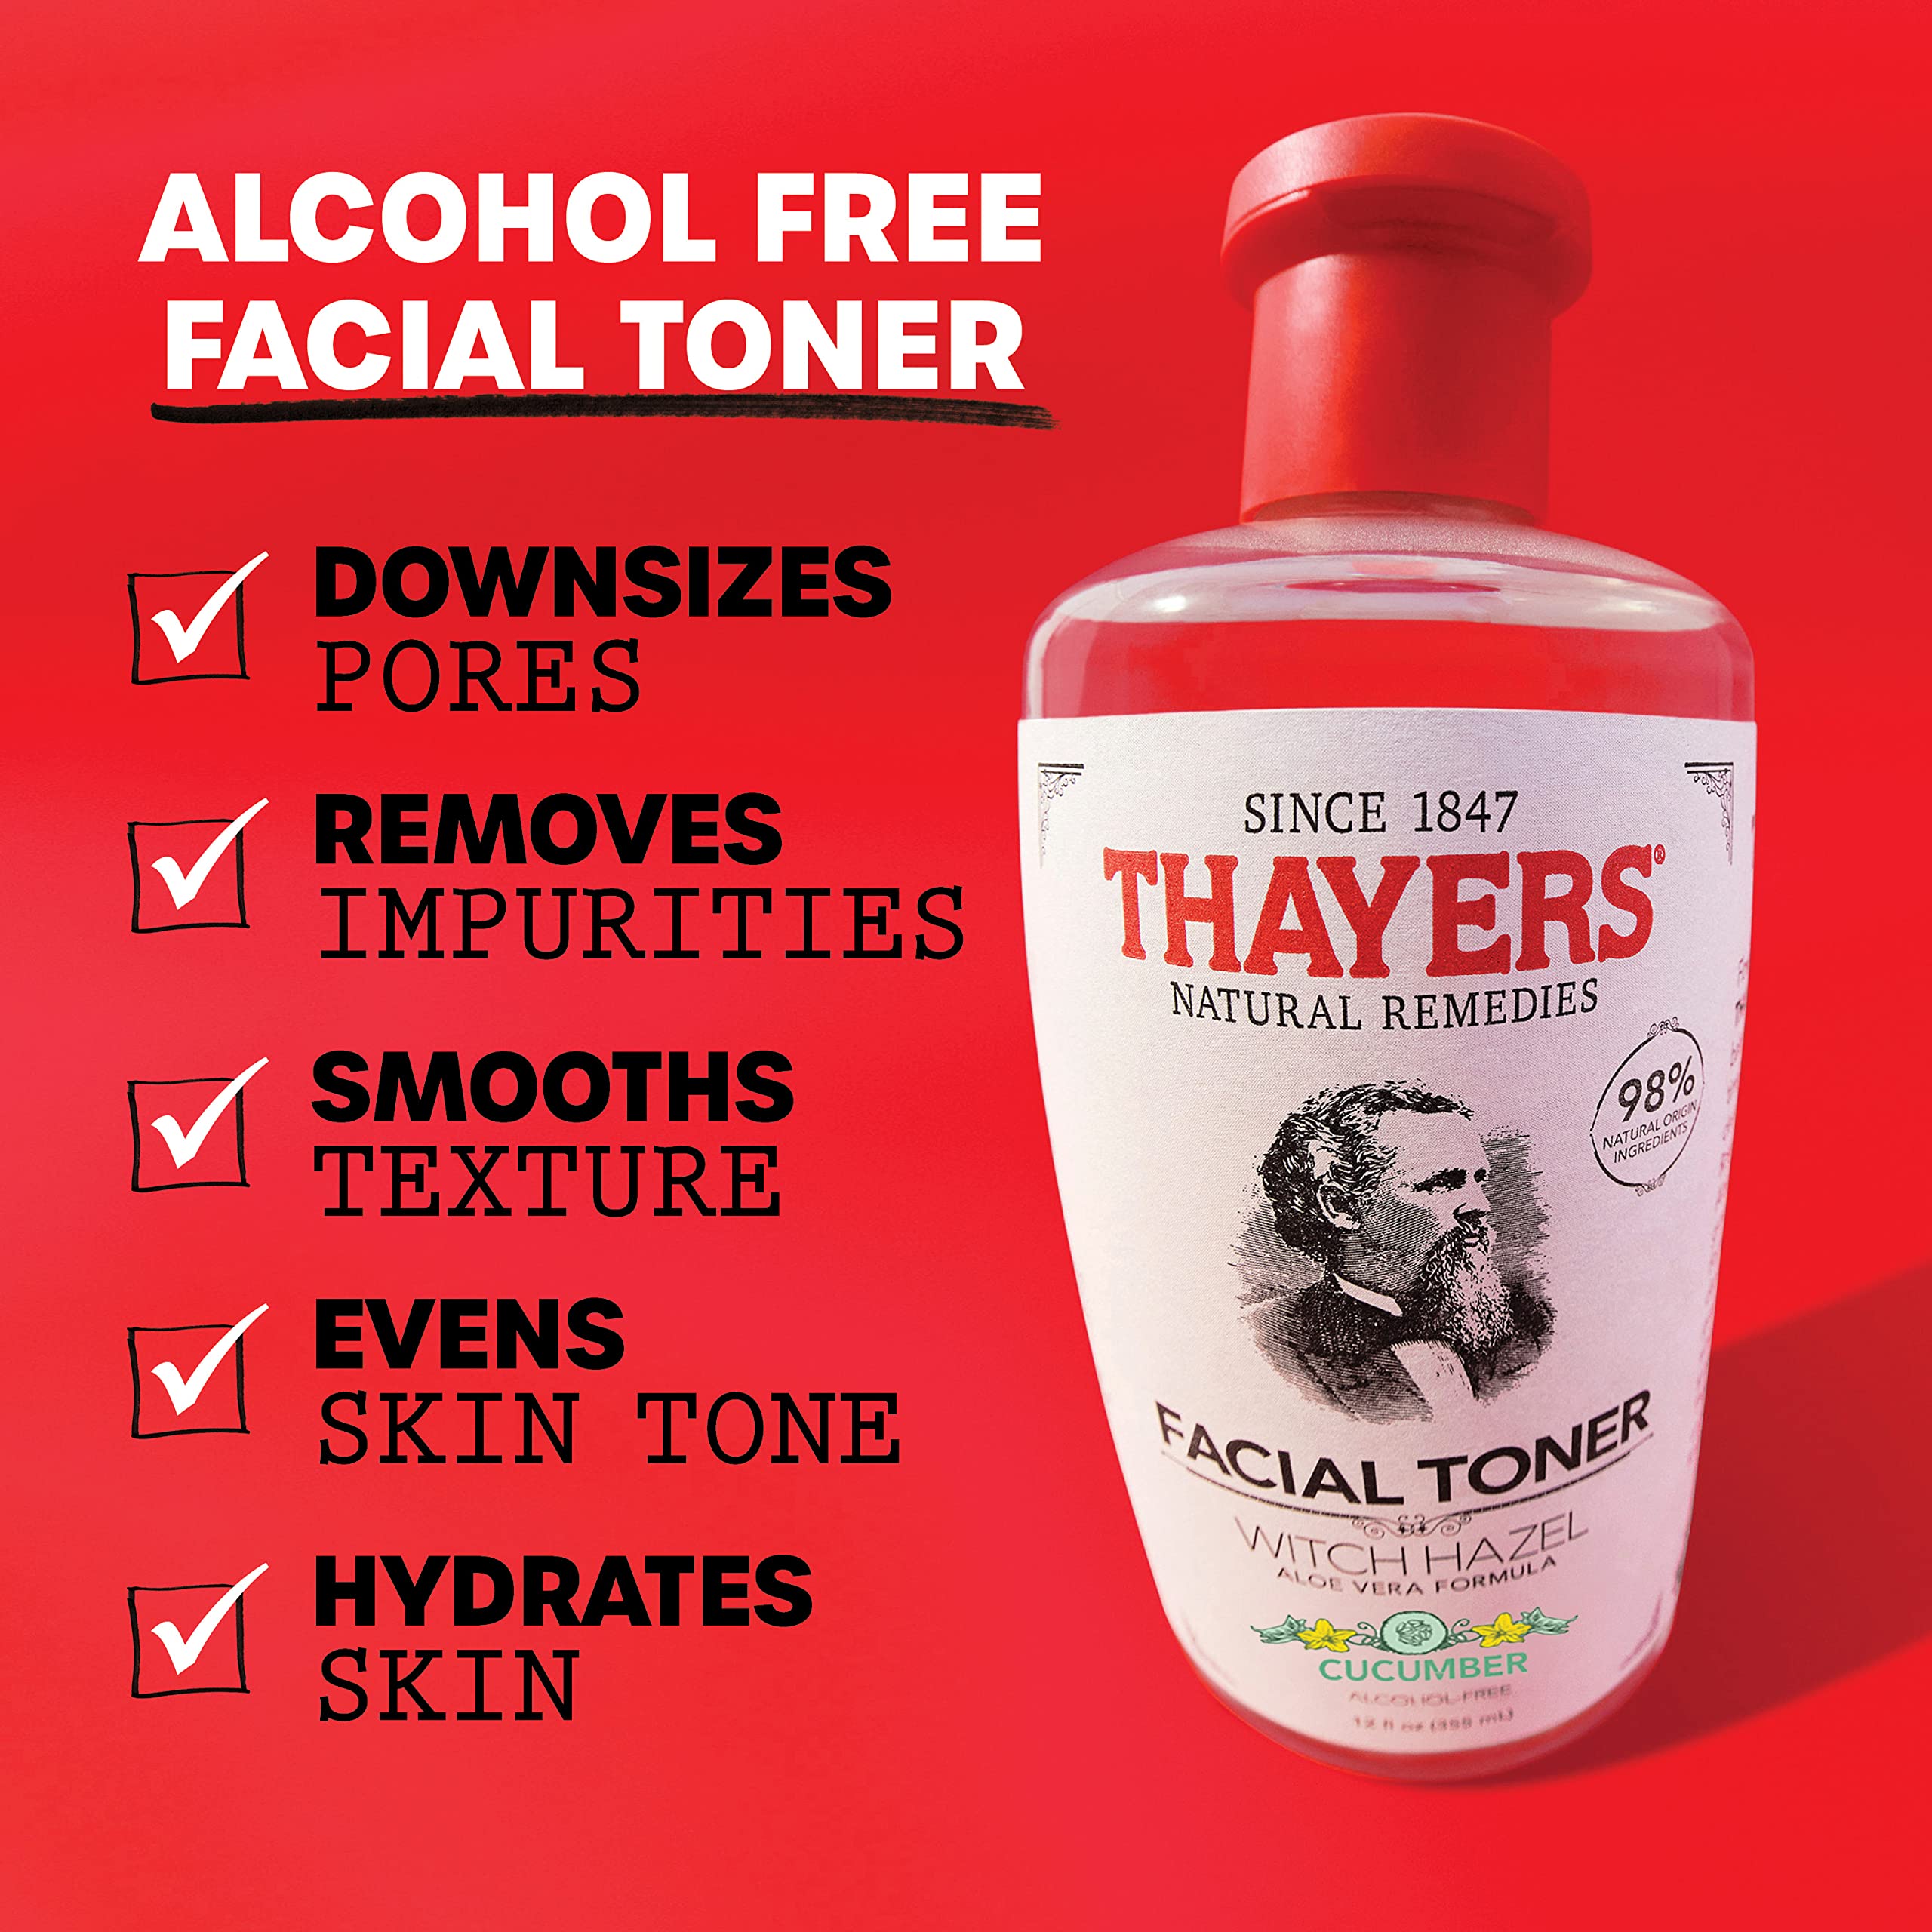 Thayers Alcohol-Free, Hydrating Cucumber Witch Hazel Facial Toner with Aloe Vera Formula, 8.5 Oz (Pack of 2)